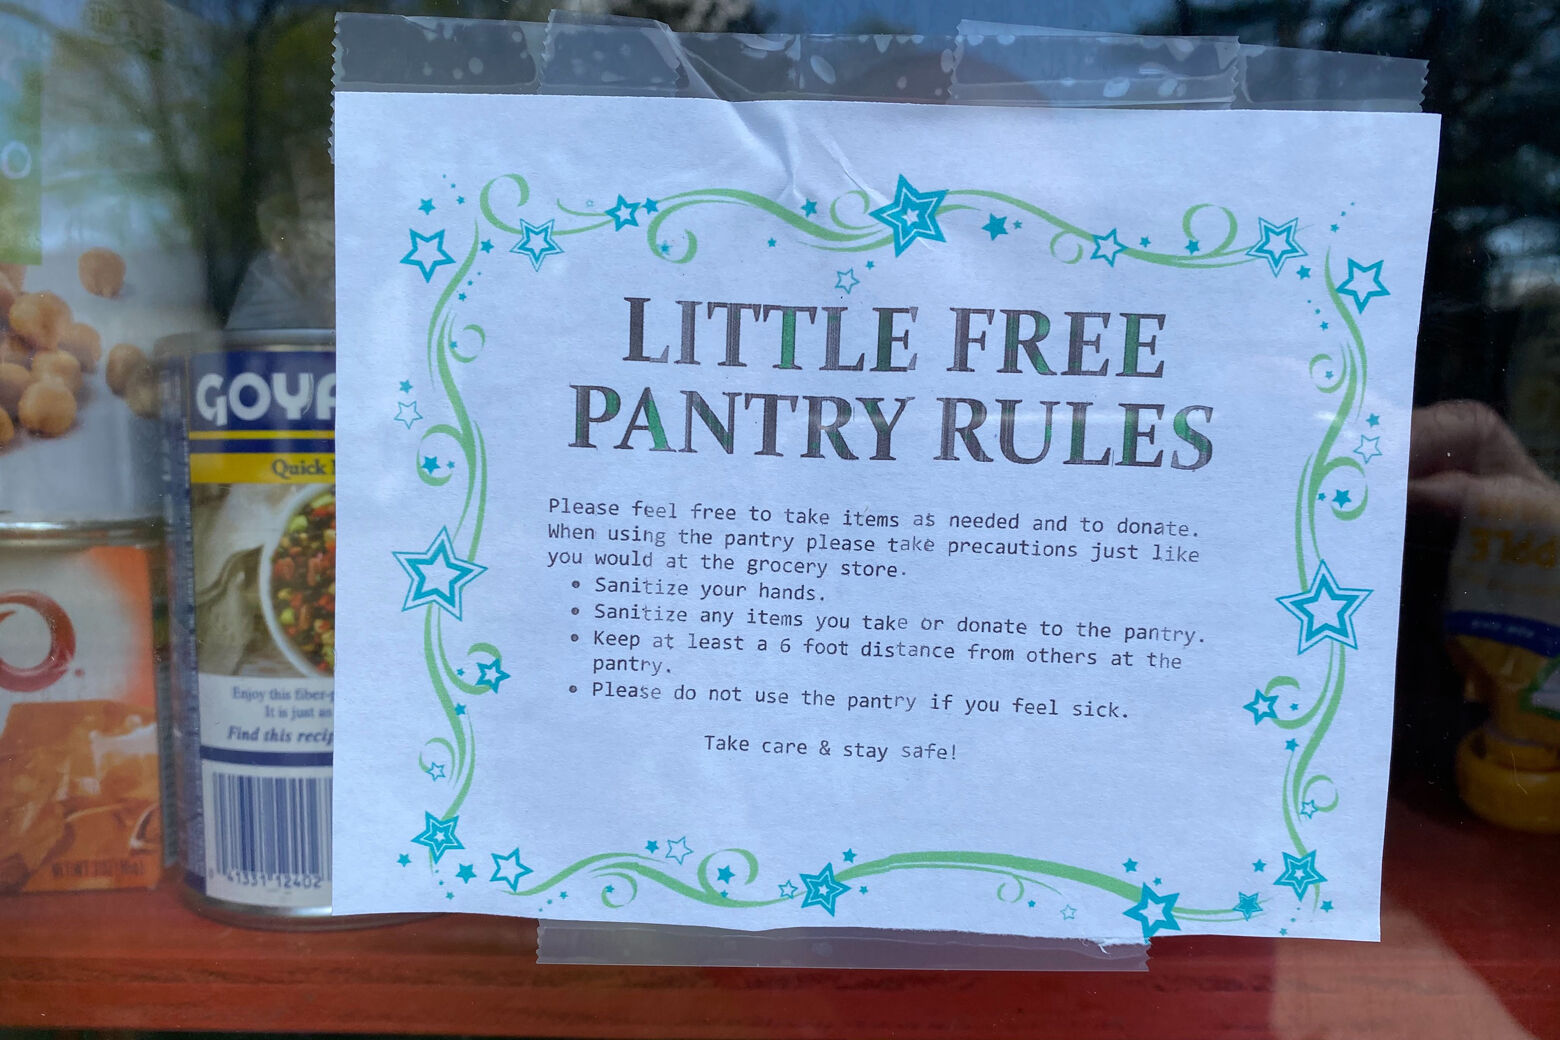 SIgn posted on the front of a little free library box